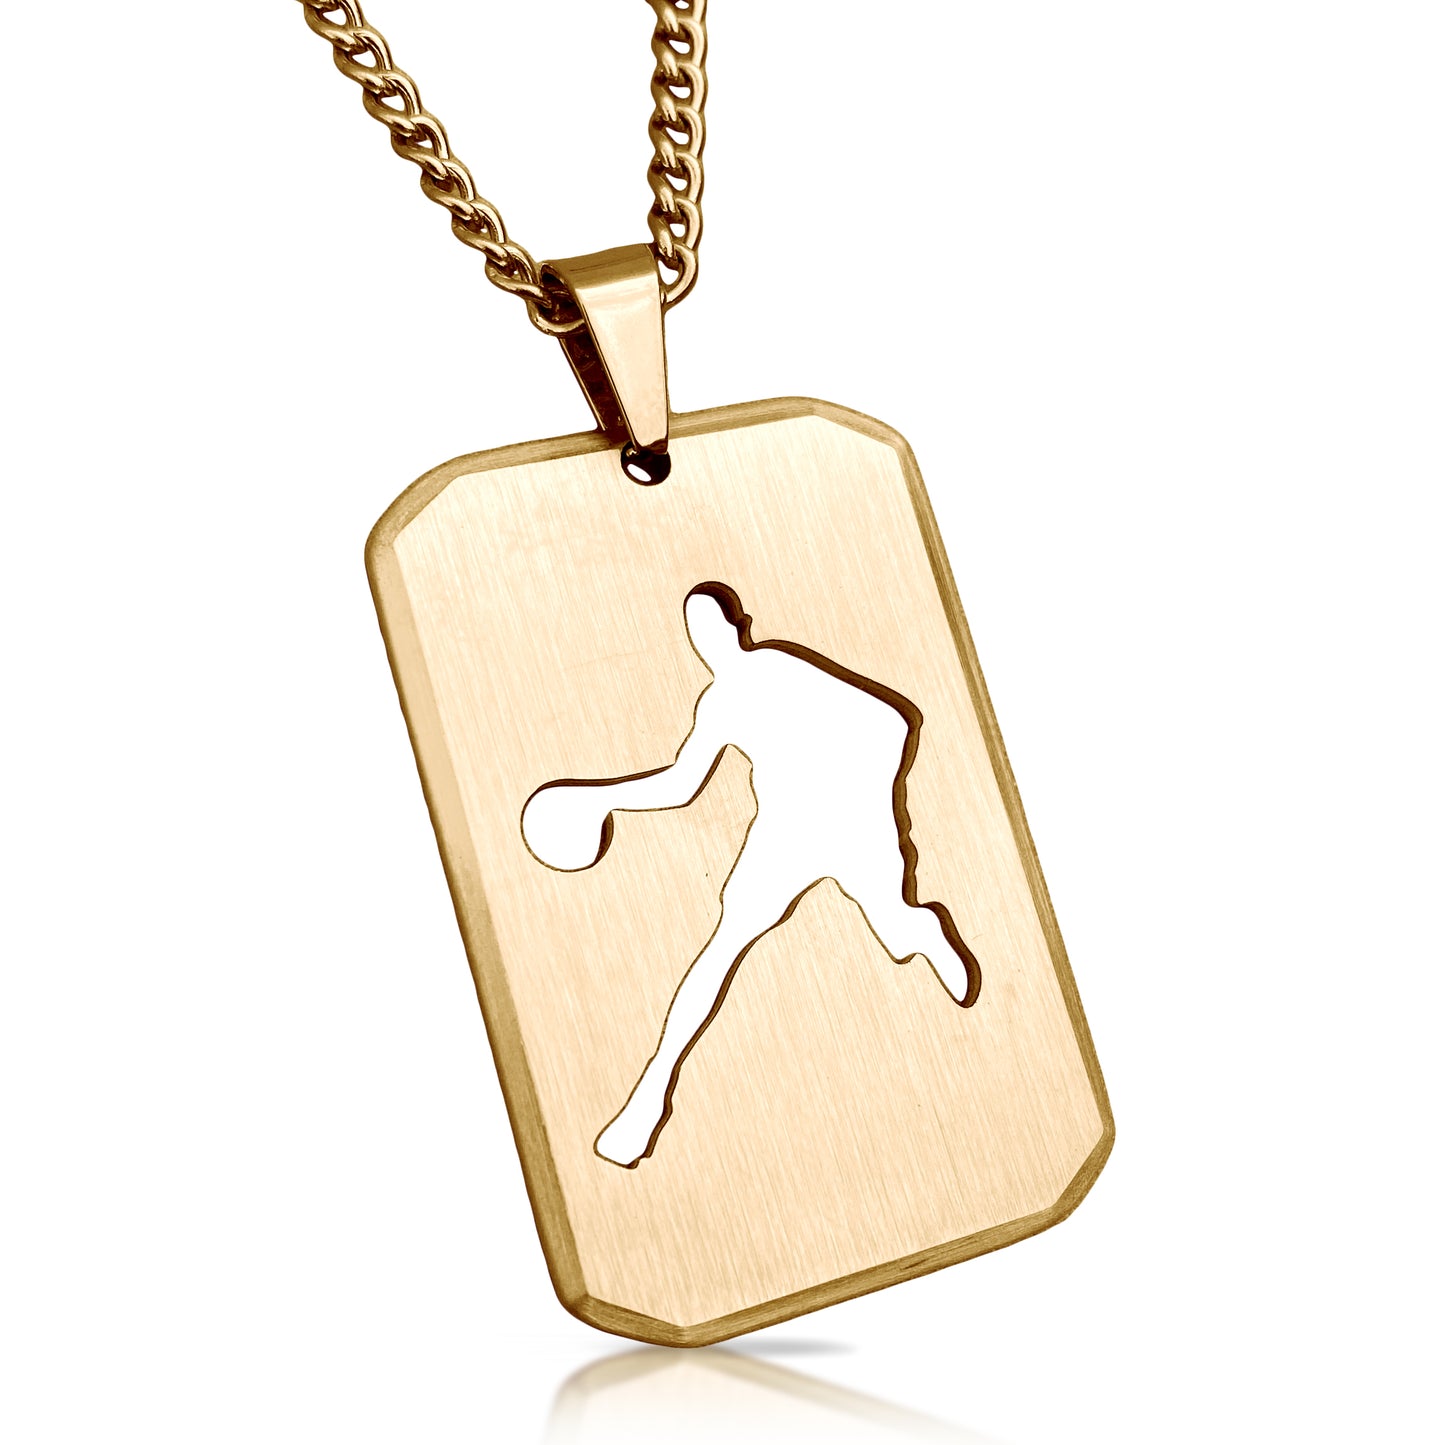 Basketball Cut Out Pendant With Chain Necklace - 14K Gold Plated Stainless Steel